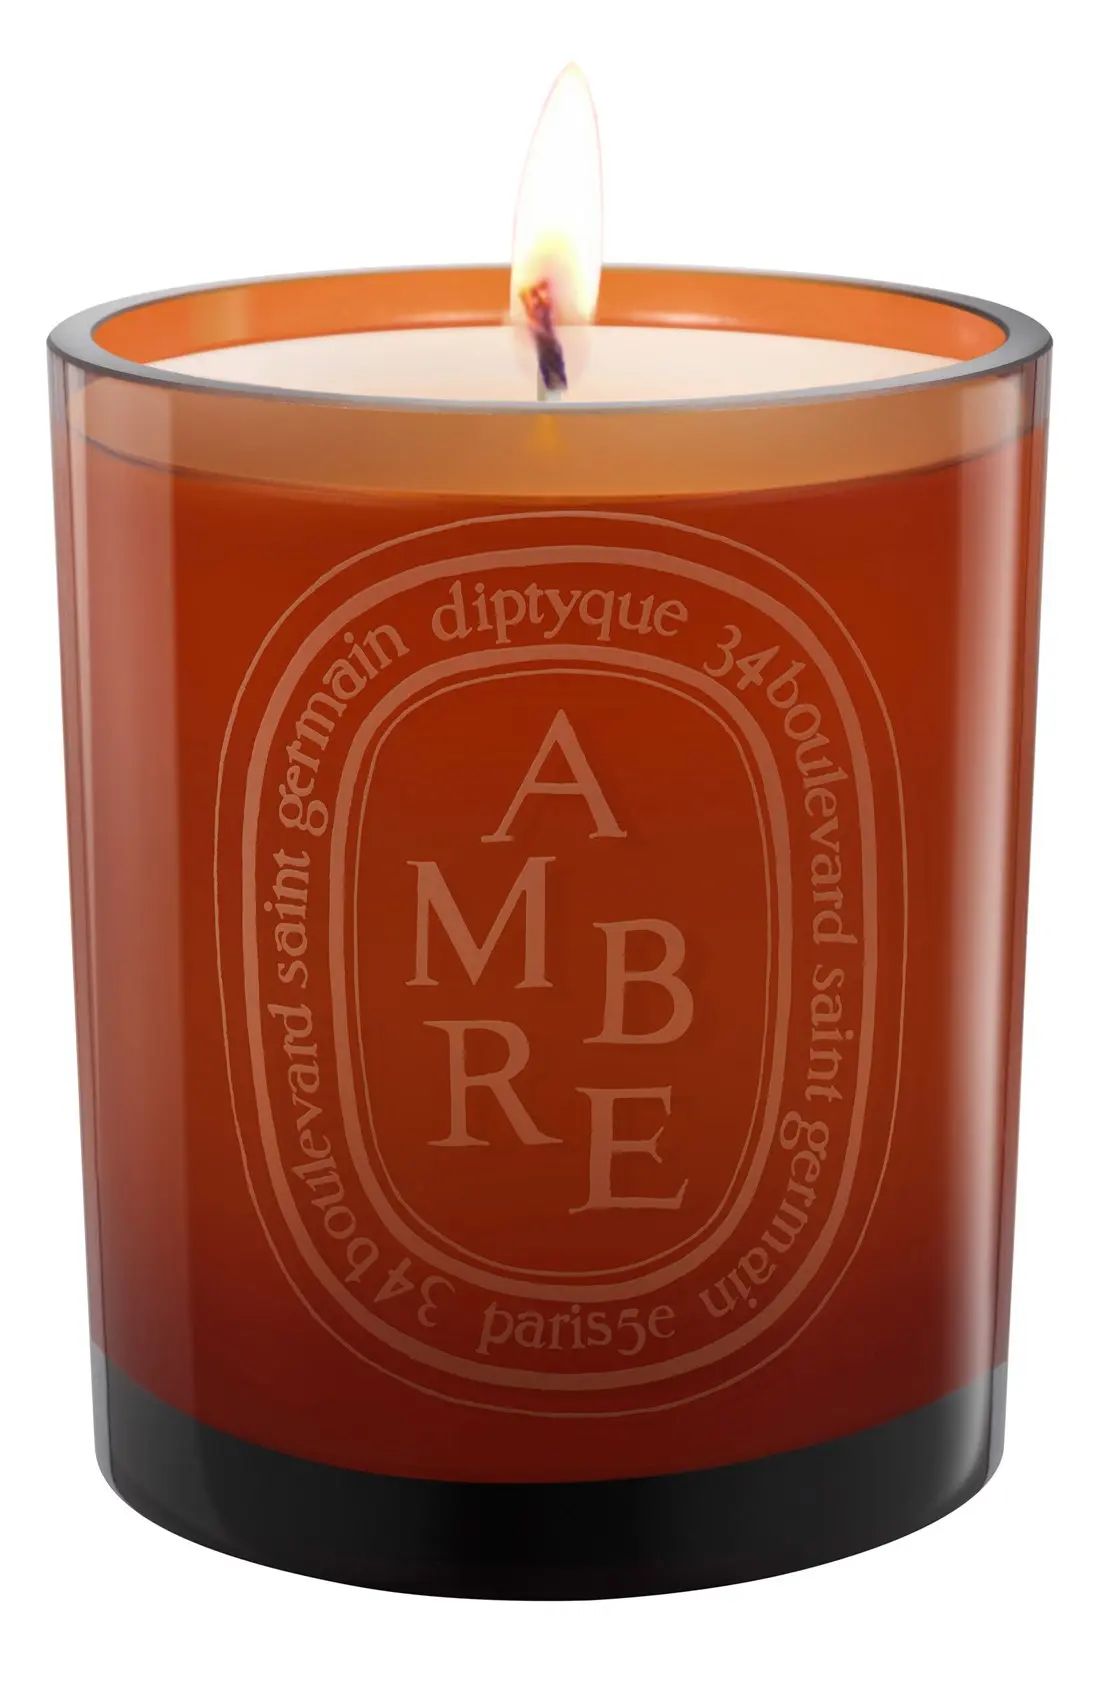 Diptyque Ambre Large Scented Candle | Nordstrom